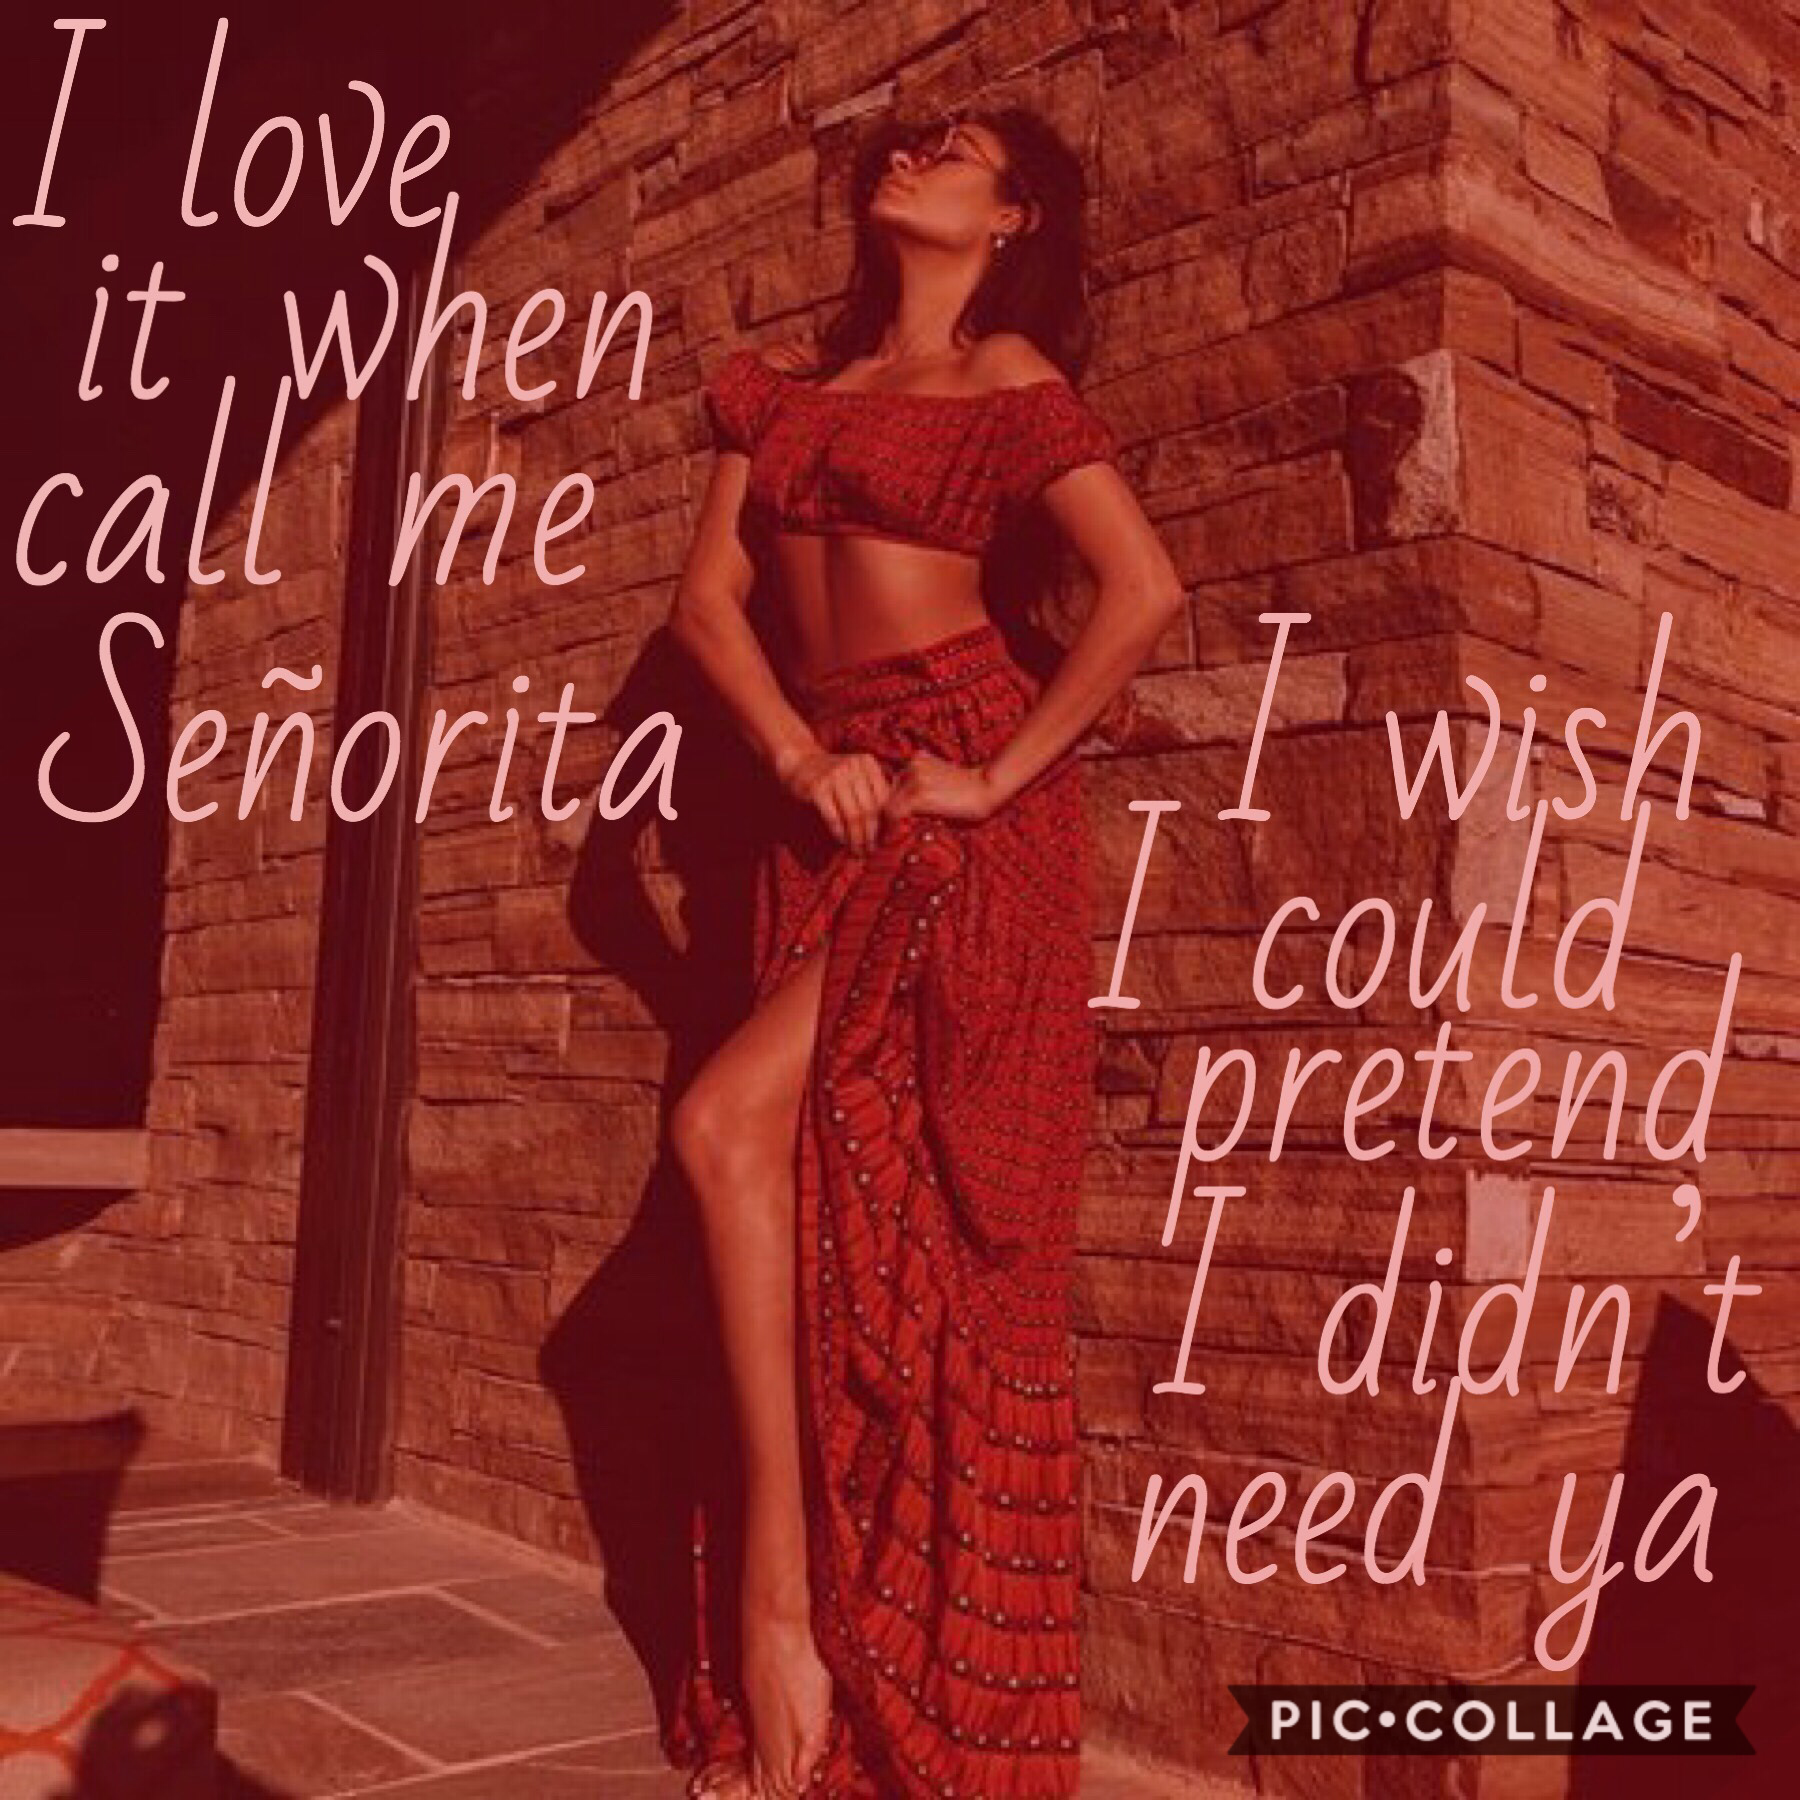 ❤️Tap❤️
Sorry I haven’t posted an actual collage in a while.

Señorita by Shawn Mendes and Camila Cabello